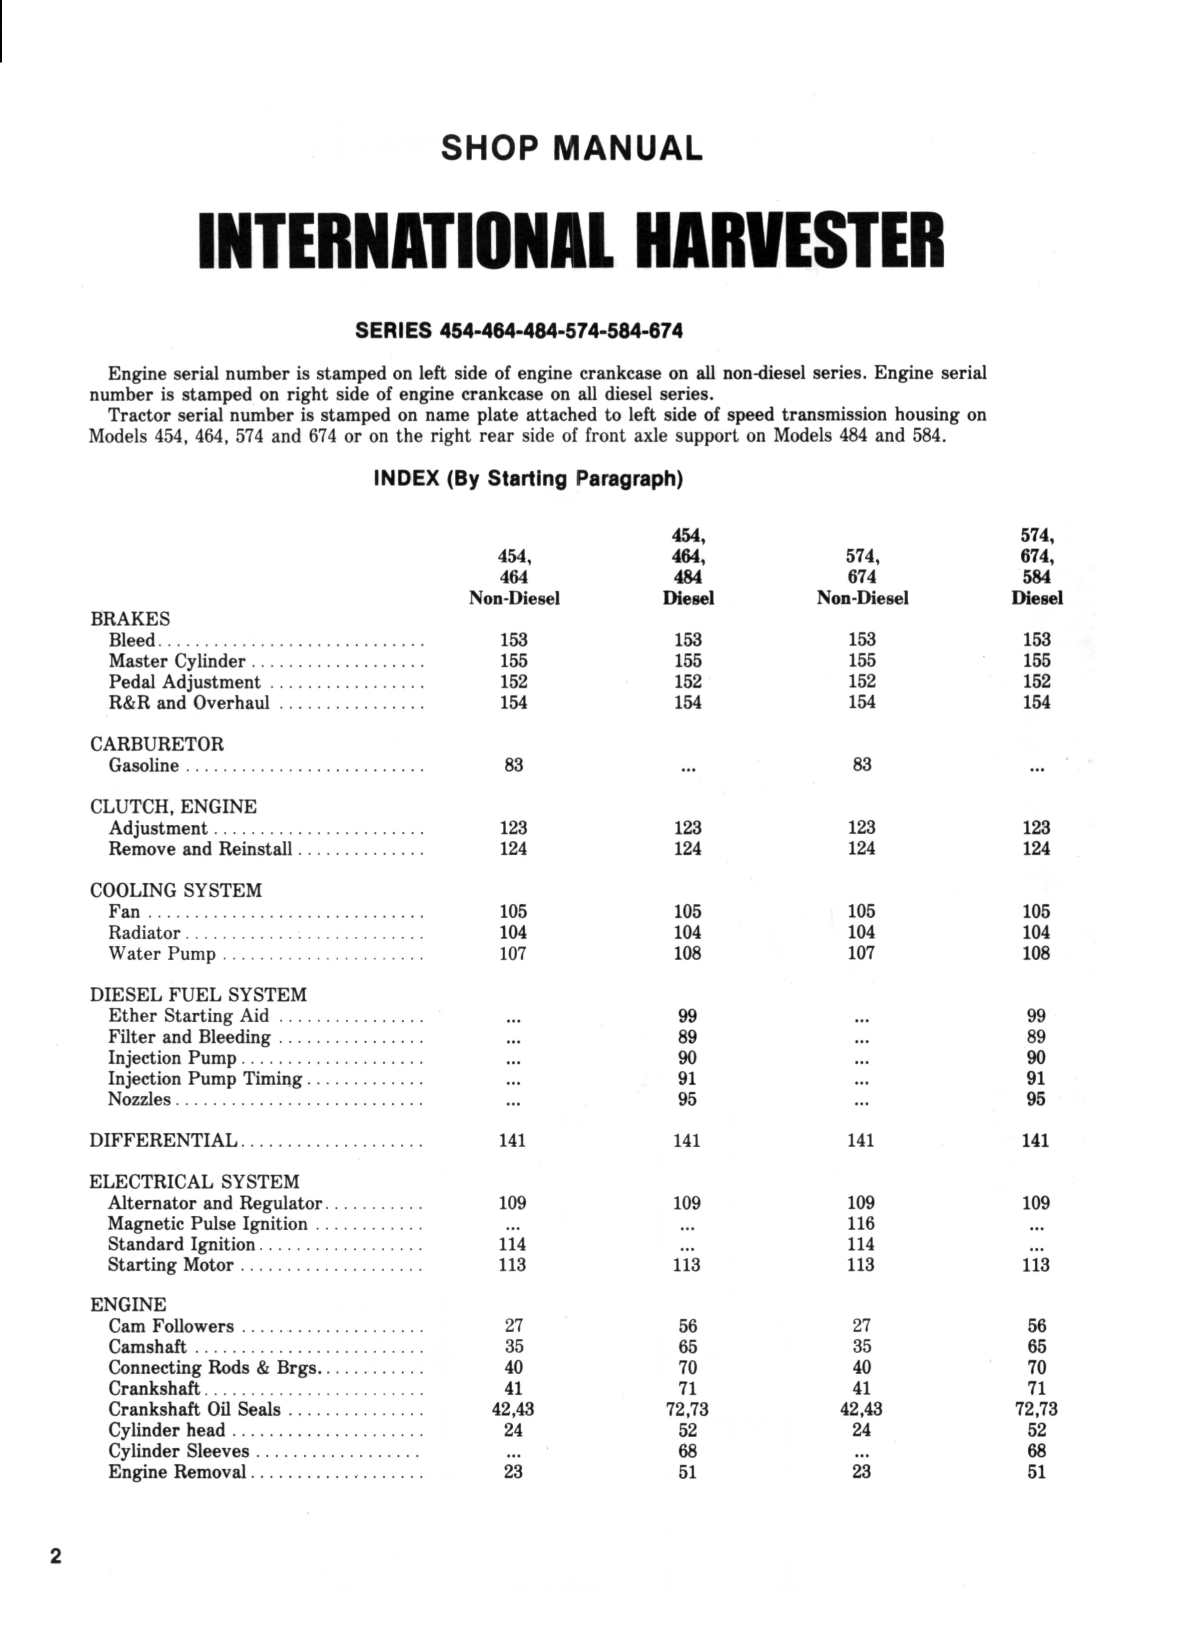 1970-1984 IH International 454, 464, 484, 574, 584, 674 tractor manual Preview image 2